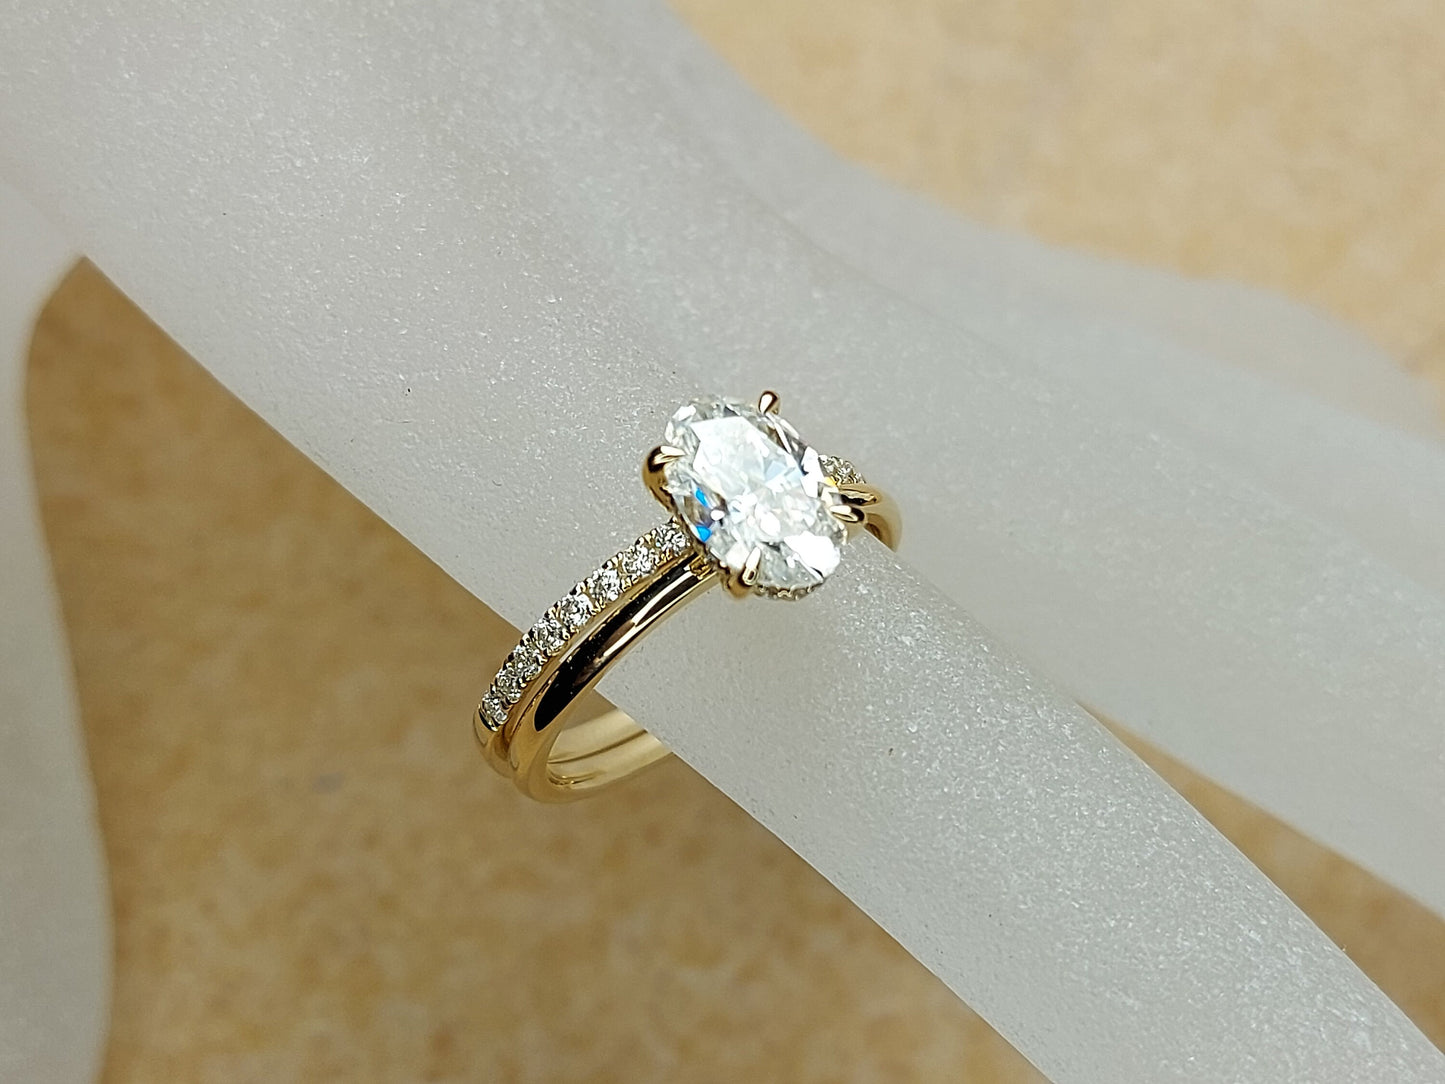 1.8Ct Oval Cut Wedding Set in Yellow Gold , Crushed Ice Oval Bridal Set, Moissanite Oval Cut Bridal Set, Moissanite bridal Set.